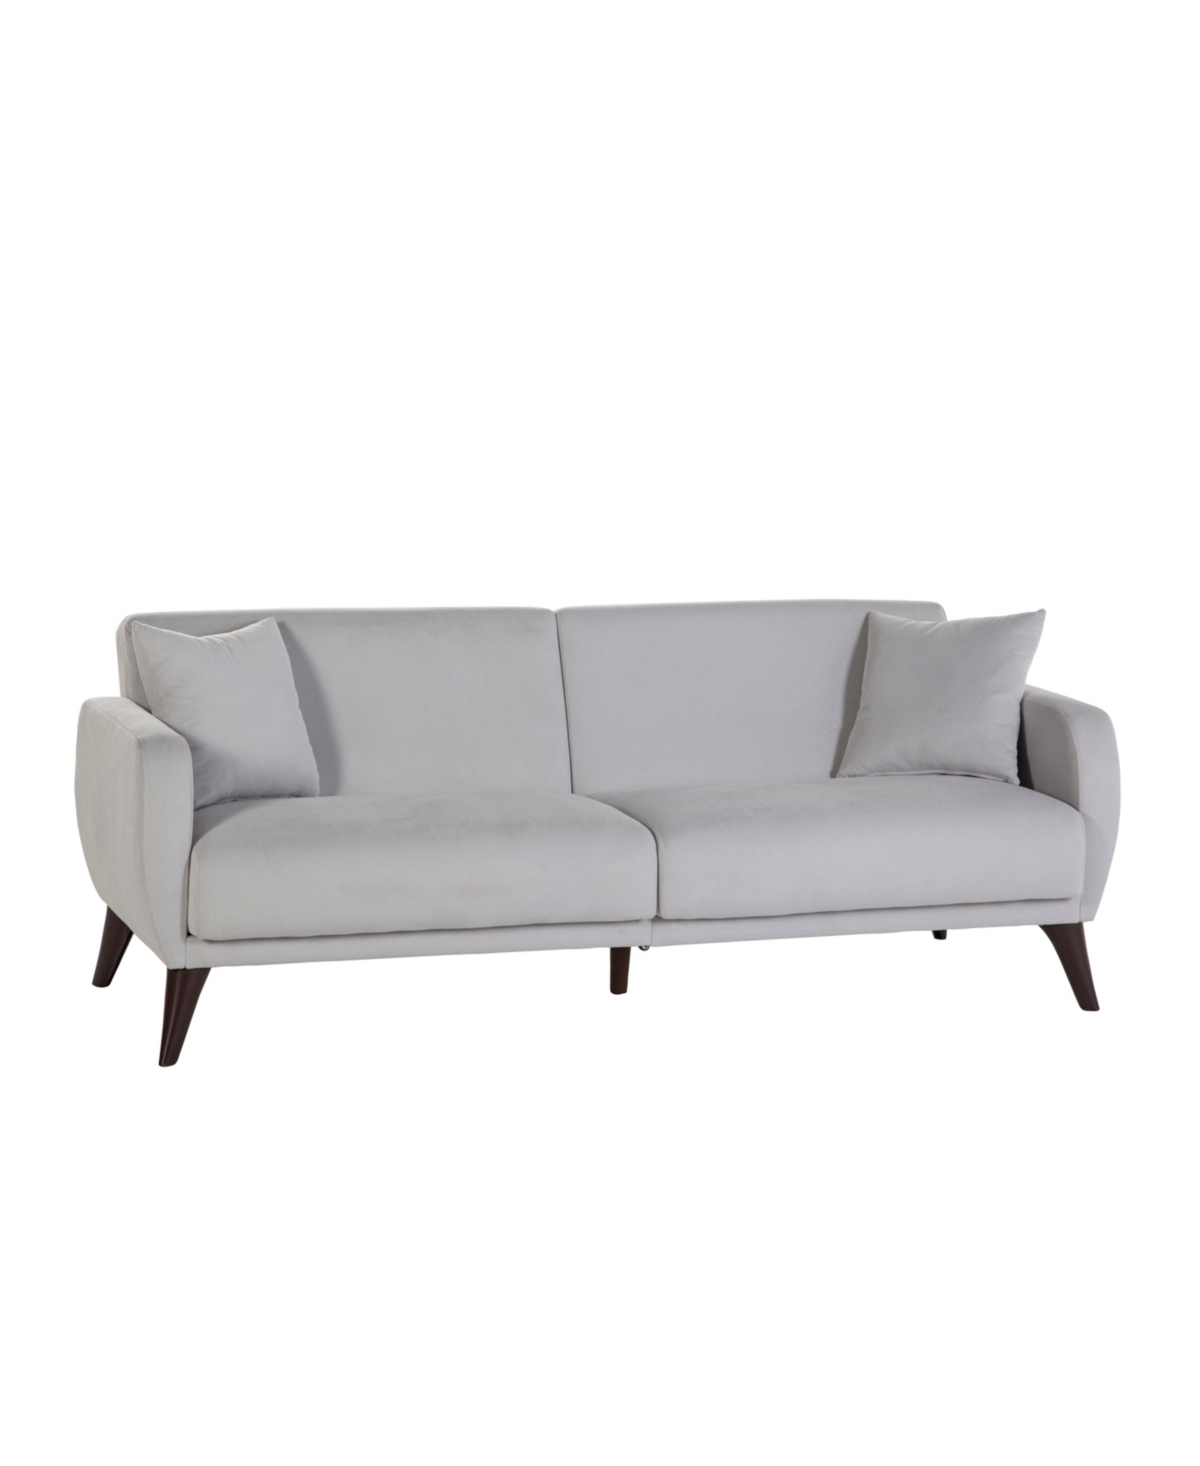 Bellona Functional Sofa in a Box